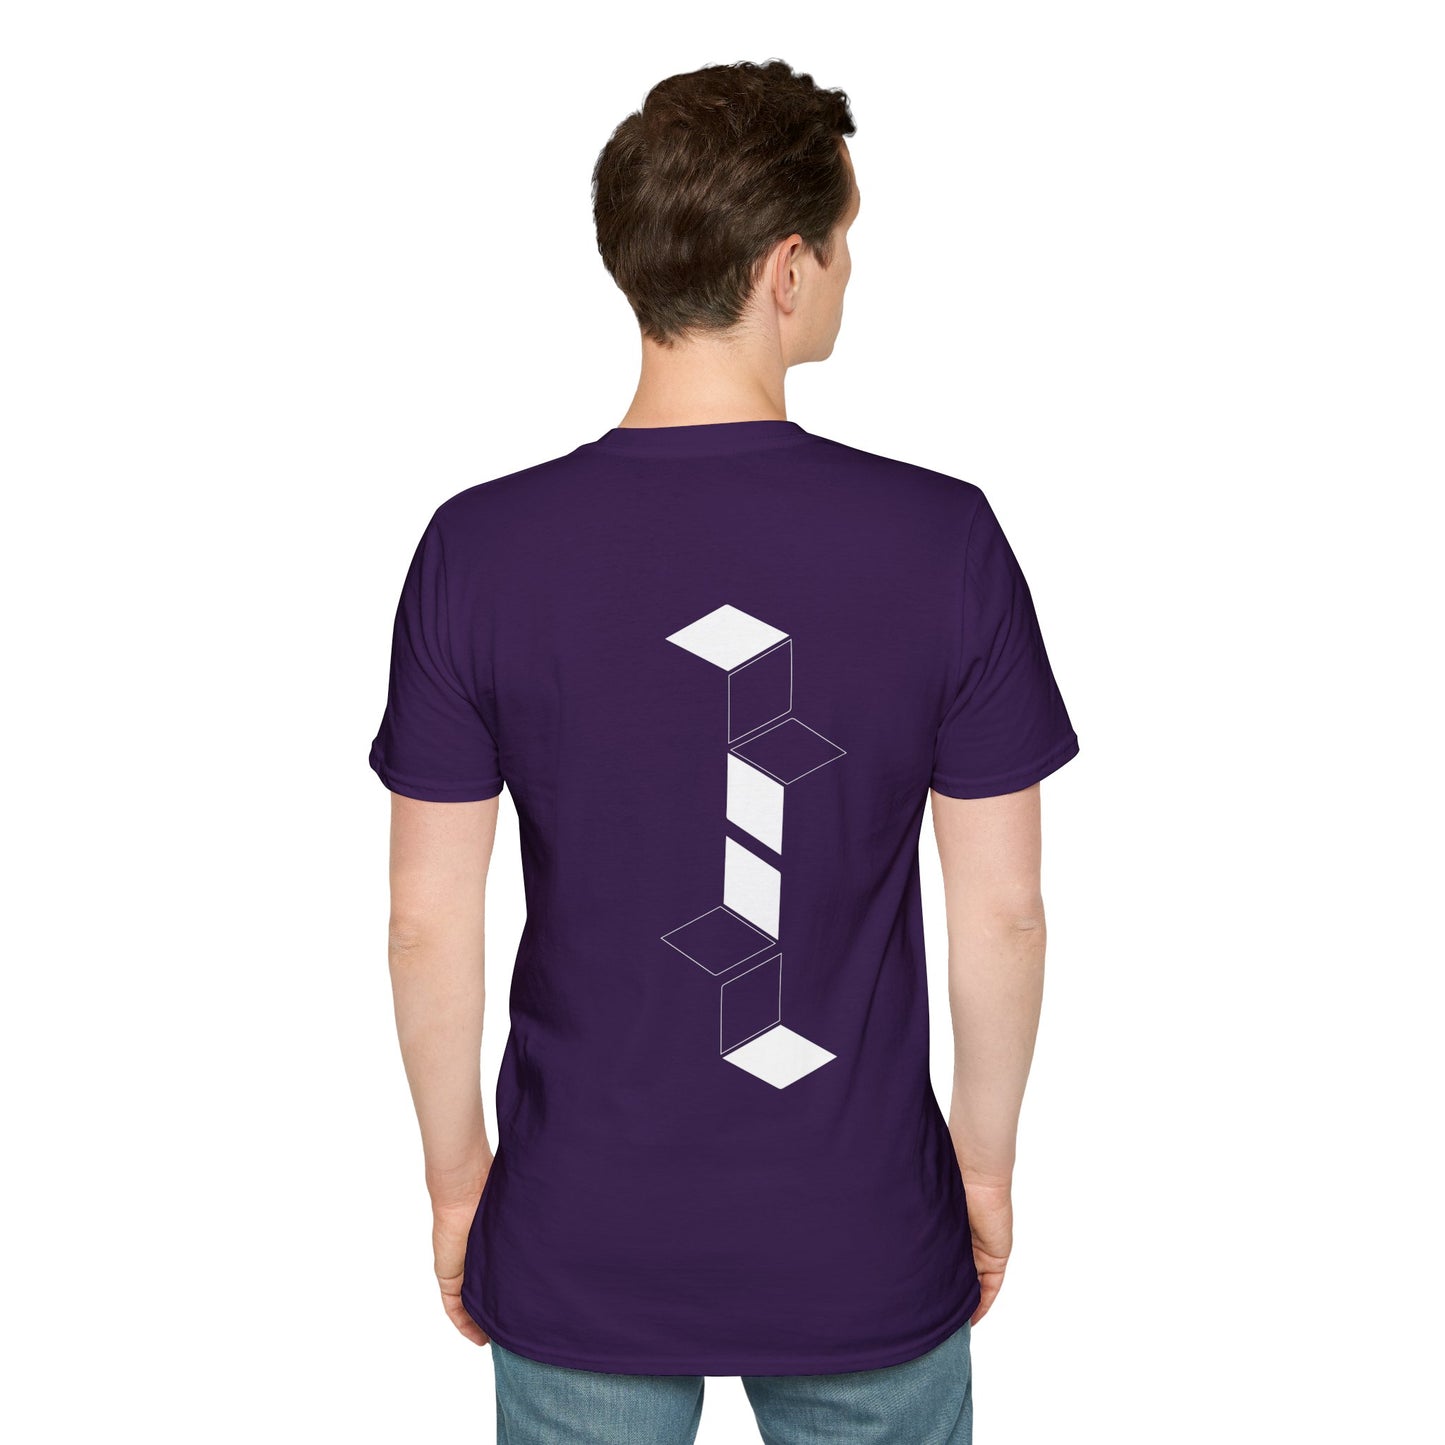 Violet T-shirt with white geometric cube pattern creating a 3D optical illusion